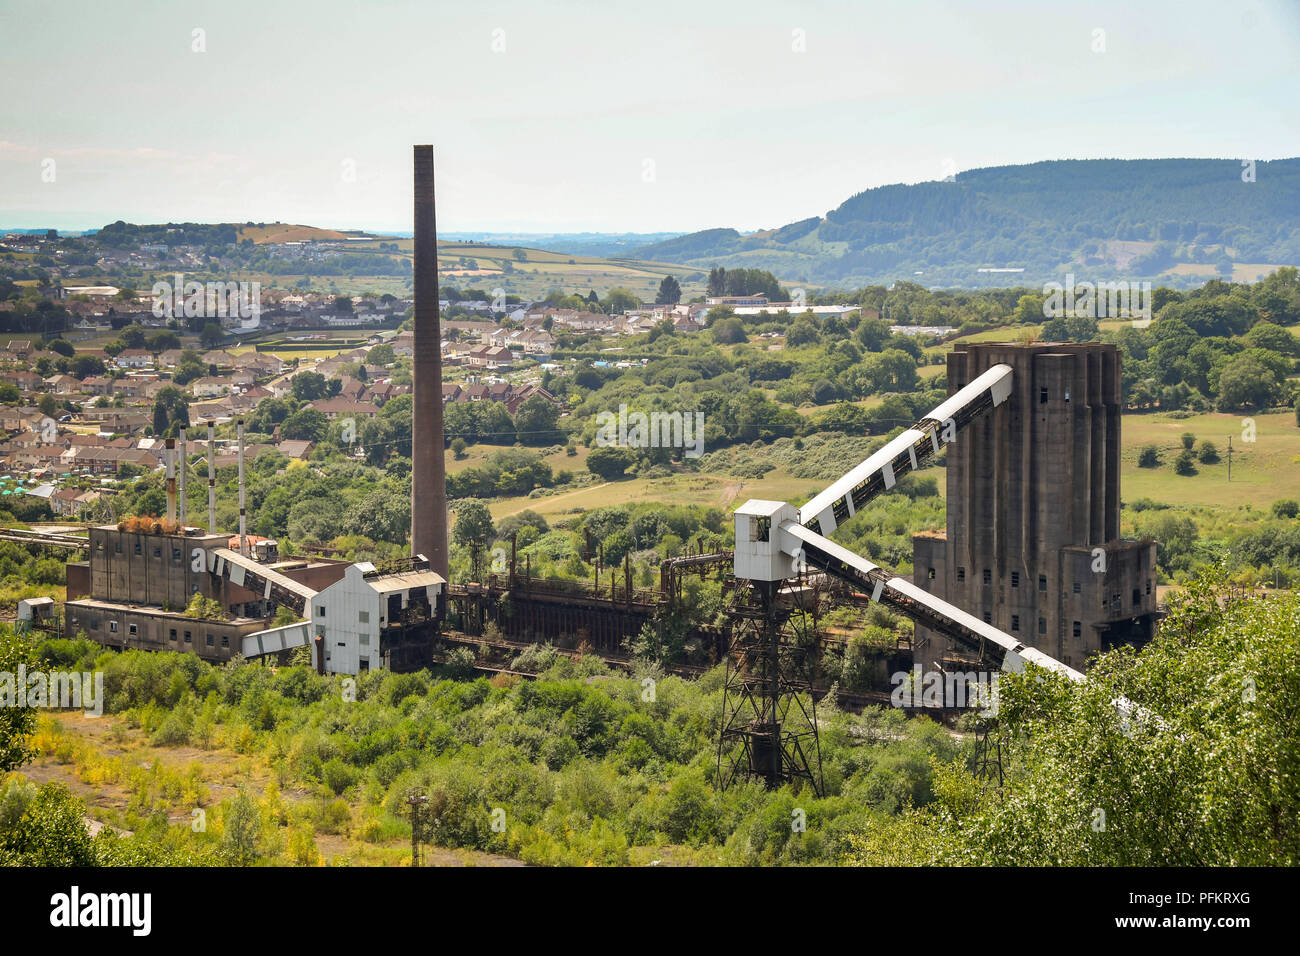 Derelict buildings  and chimney stack on the site of the former Cwm colliery and coke ovens in Beddau near Pontypridd, Wales. Stock Photo